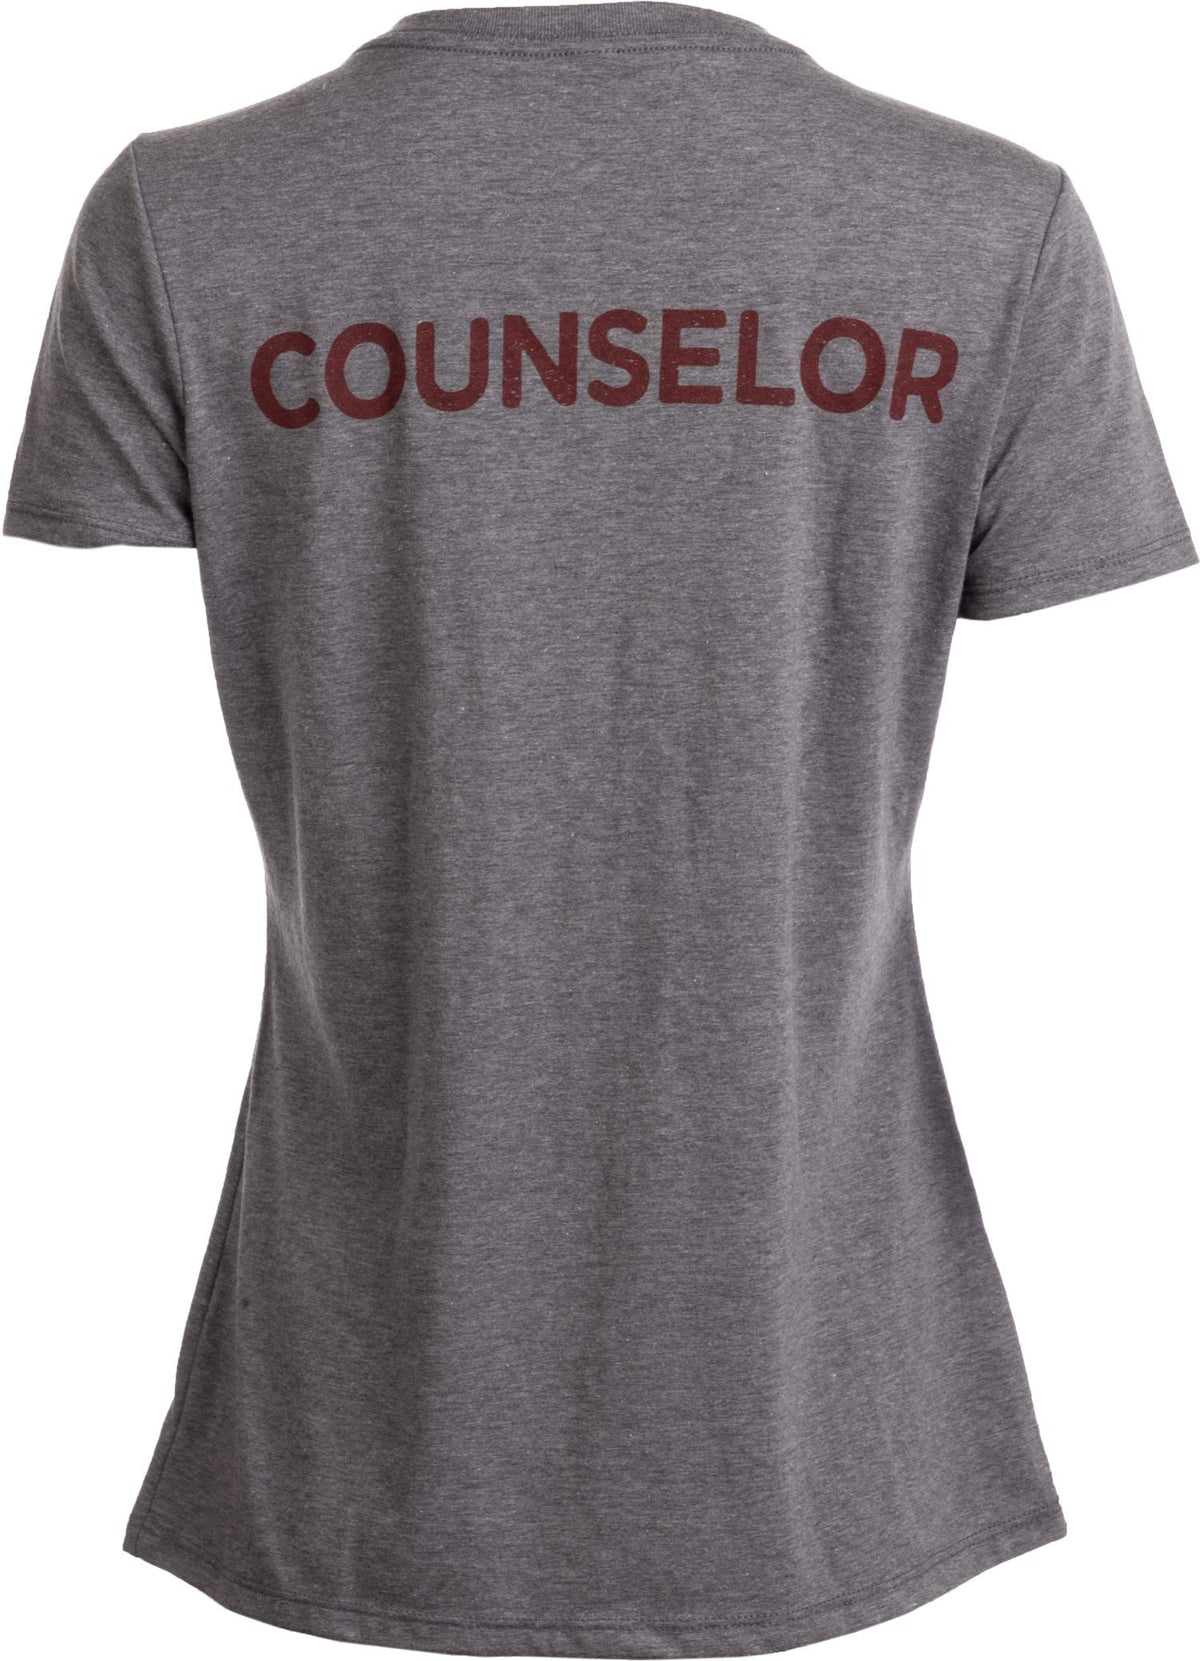 Camp Crystal Lake Counselor - V-Neck Tee - Women's